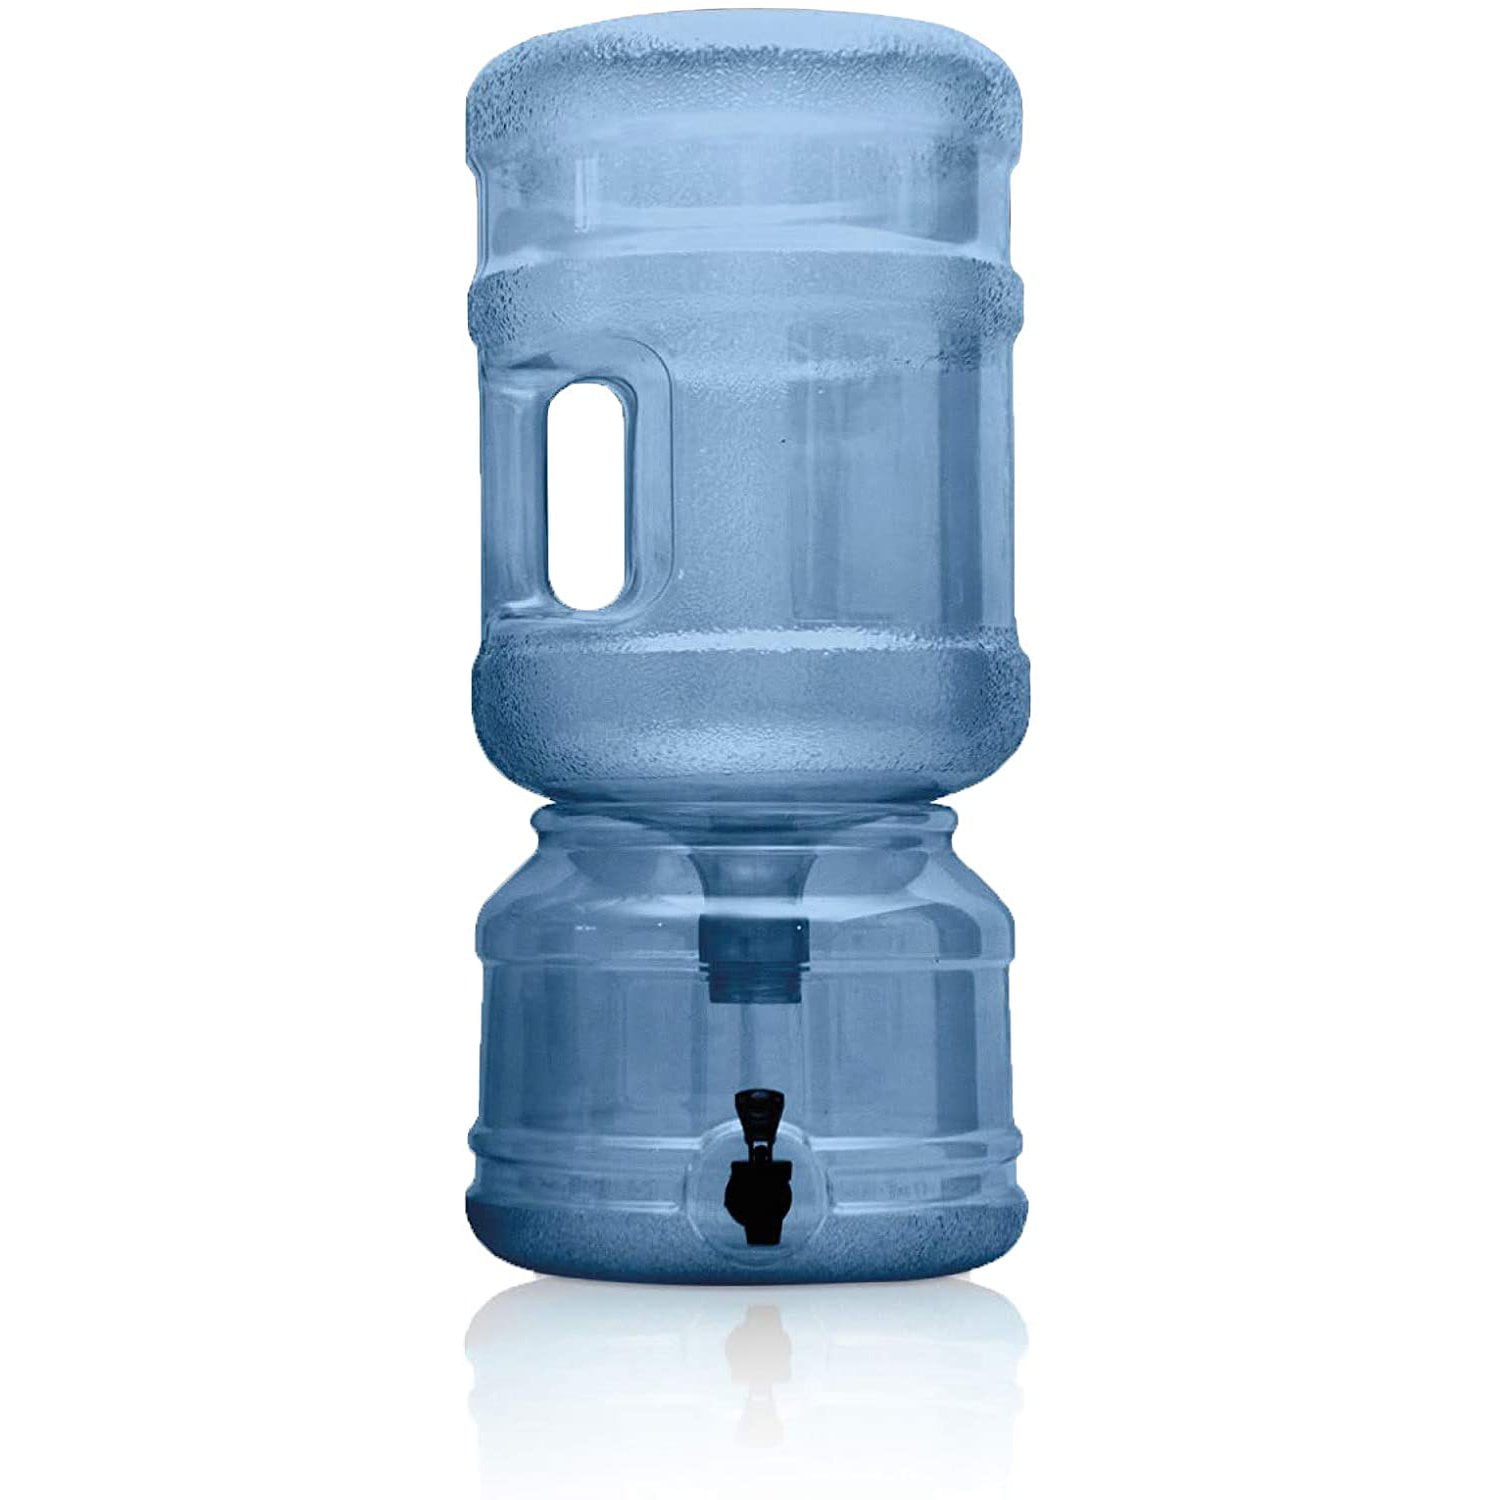 Set of 2 - BPA FREE Water Dispenser Base with Spigot & 5 Gallon Water Jug  Set - Transparent Blue - For Countertops or Stands - 2 Complete Sets